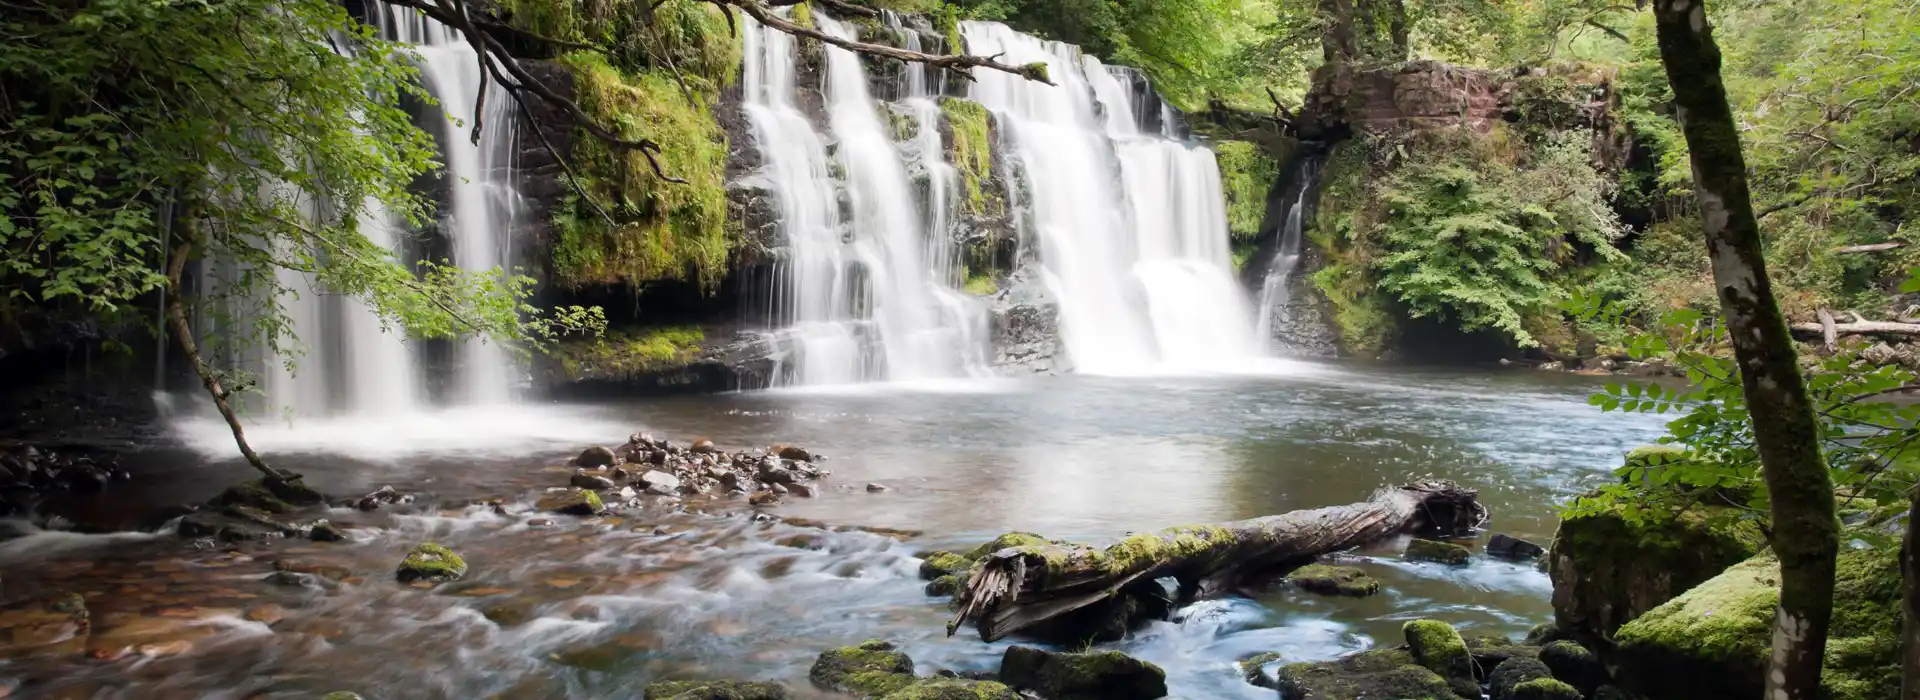 Best campsites in the Brecon Beacons